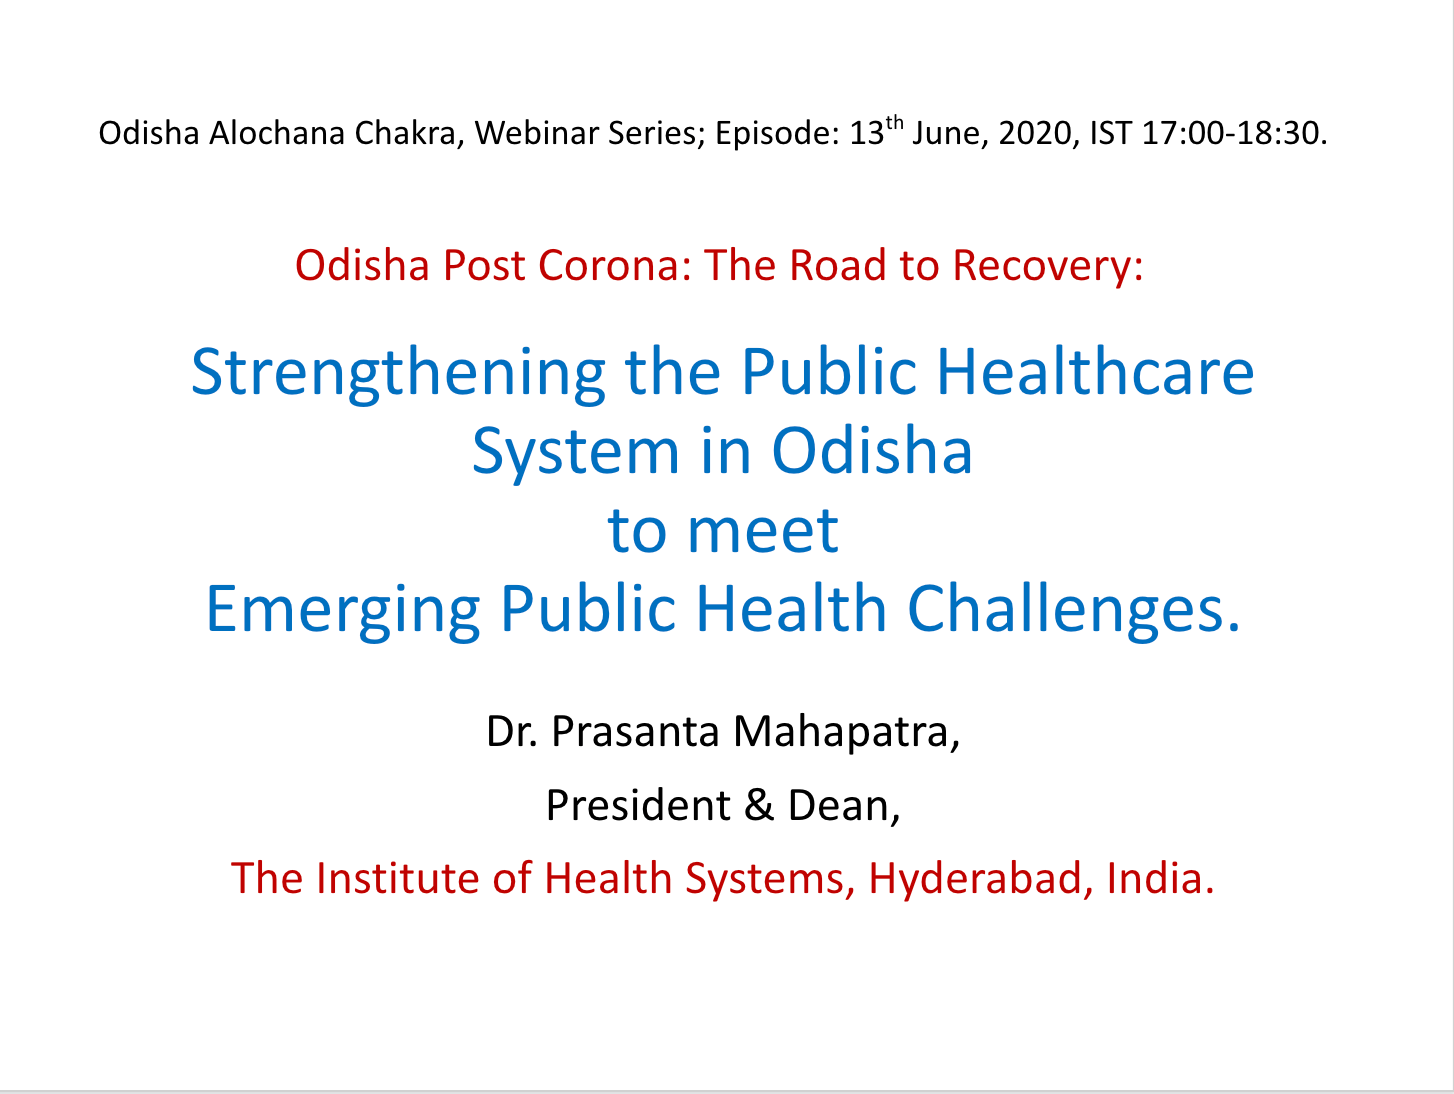 Strengthening the Public Healthcare System in Odisha by Dr Prasanta Mahapatra, President & Dean, The Institute of Health Systems, Hyderabad